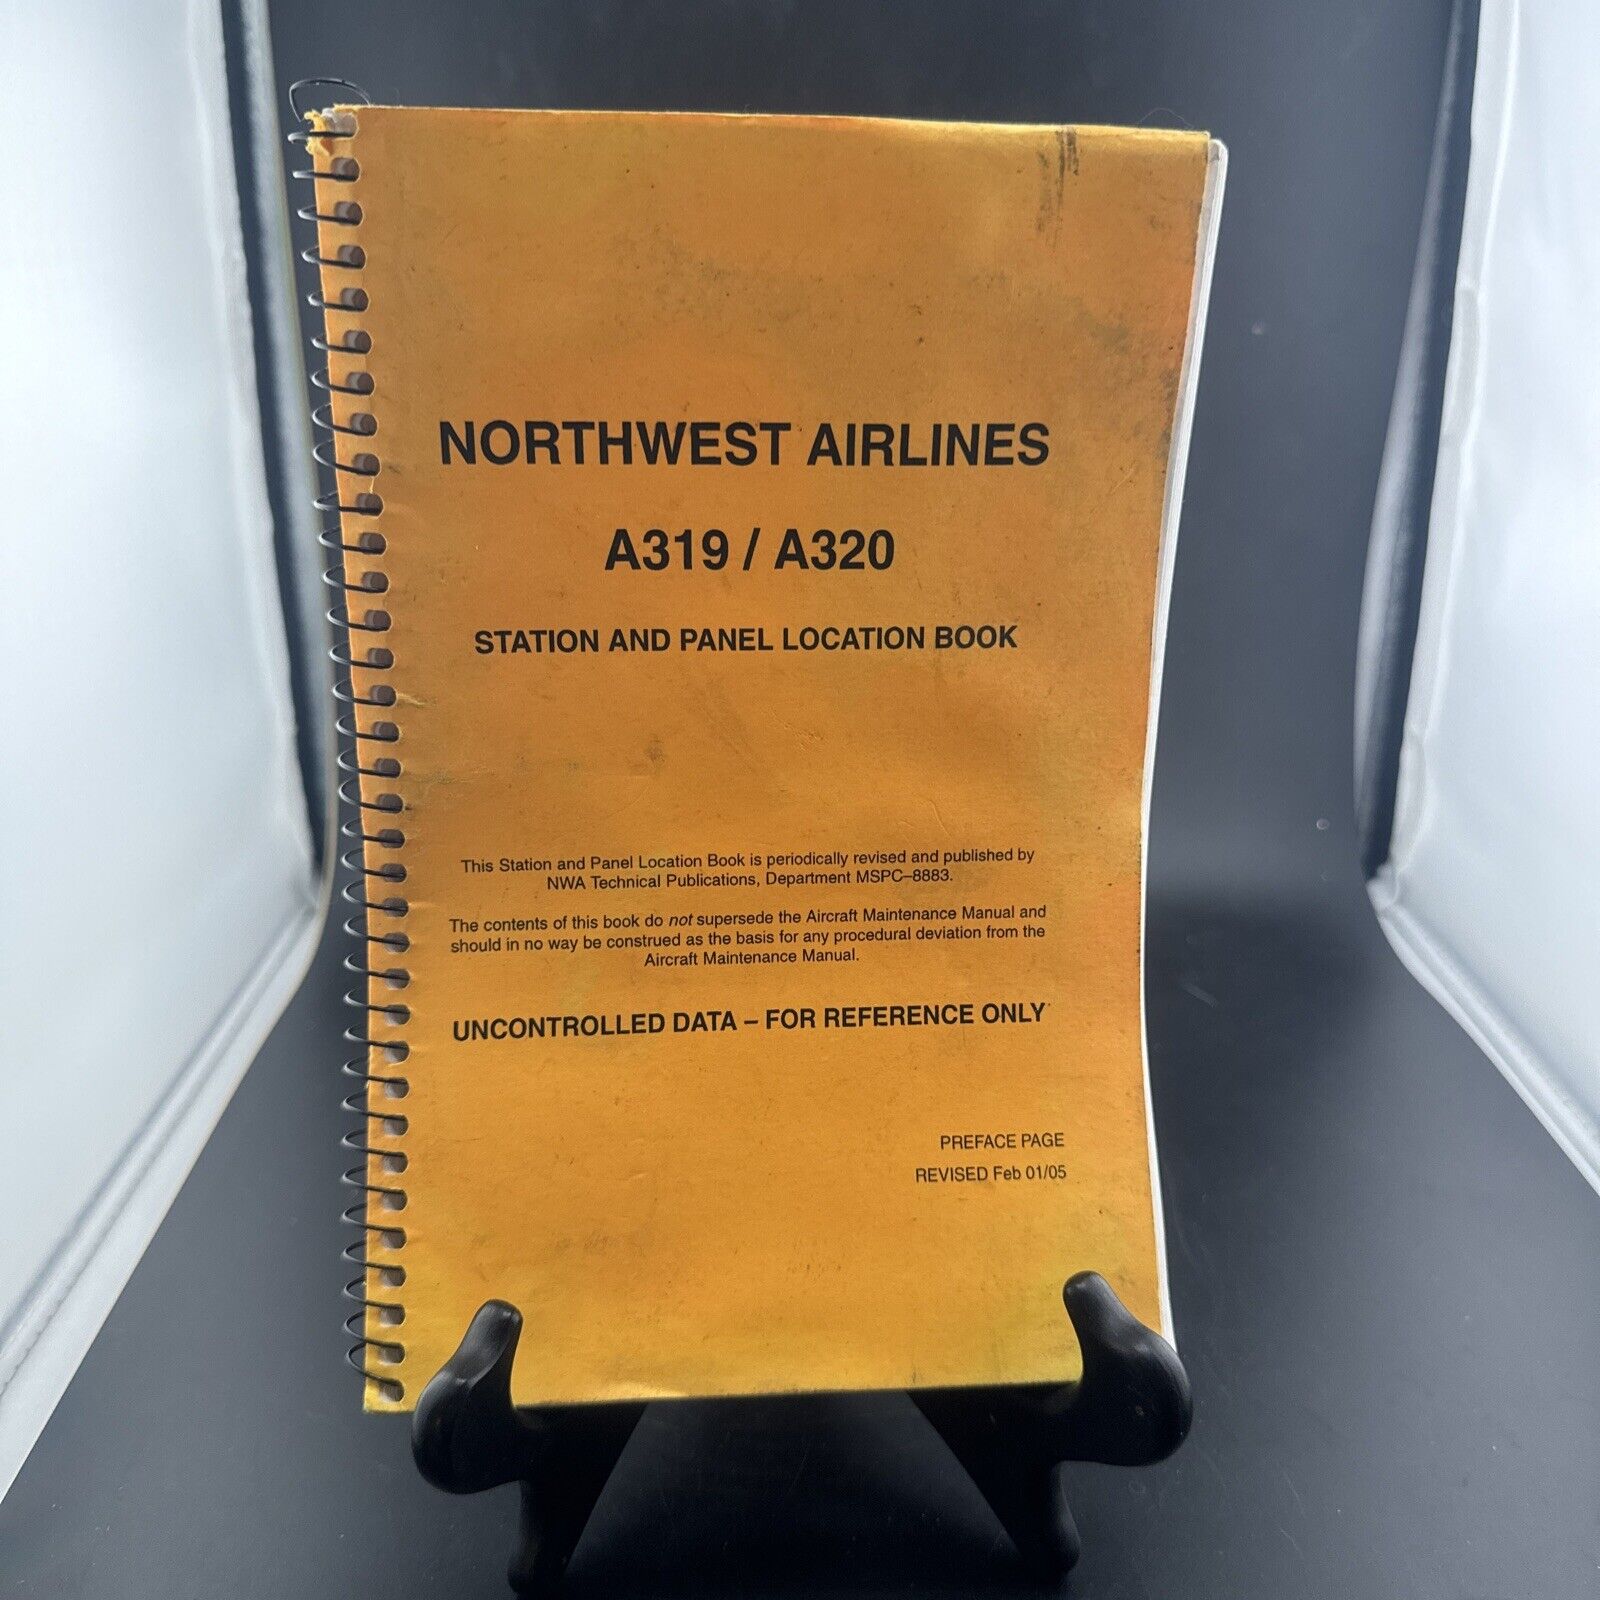 NORTHWEST AIRLINES Airbus A319 A320 Station and Panel Location Book 2001